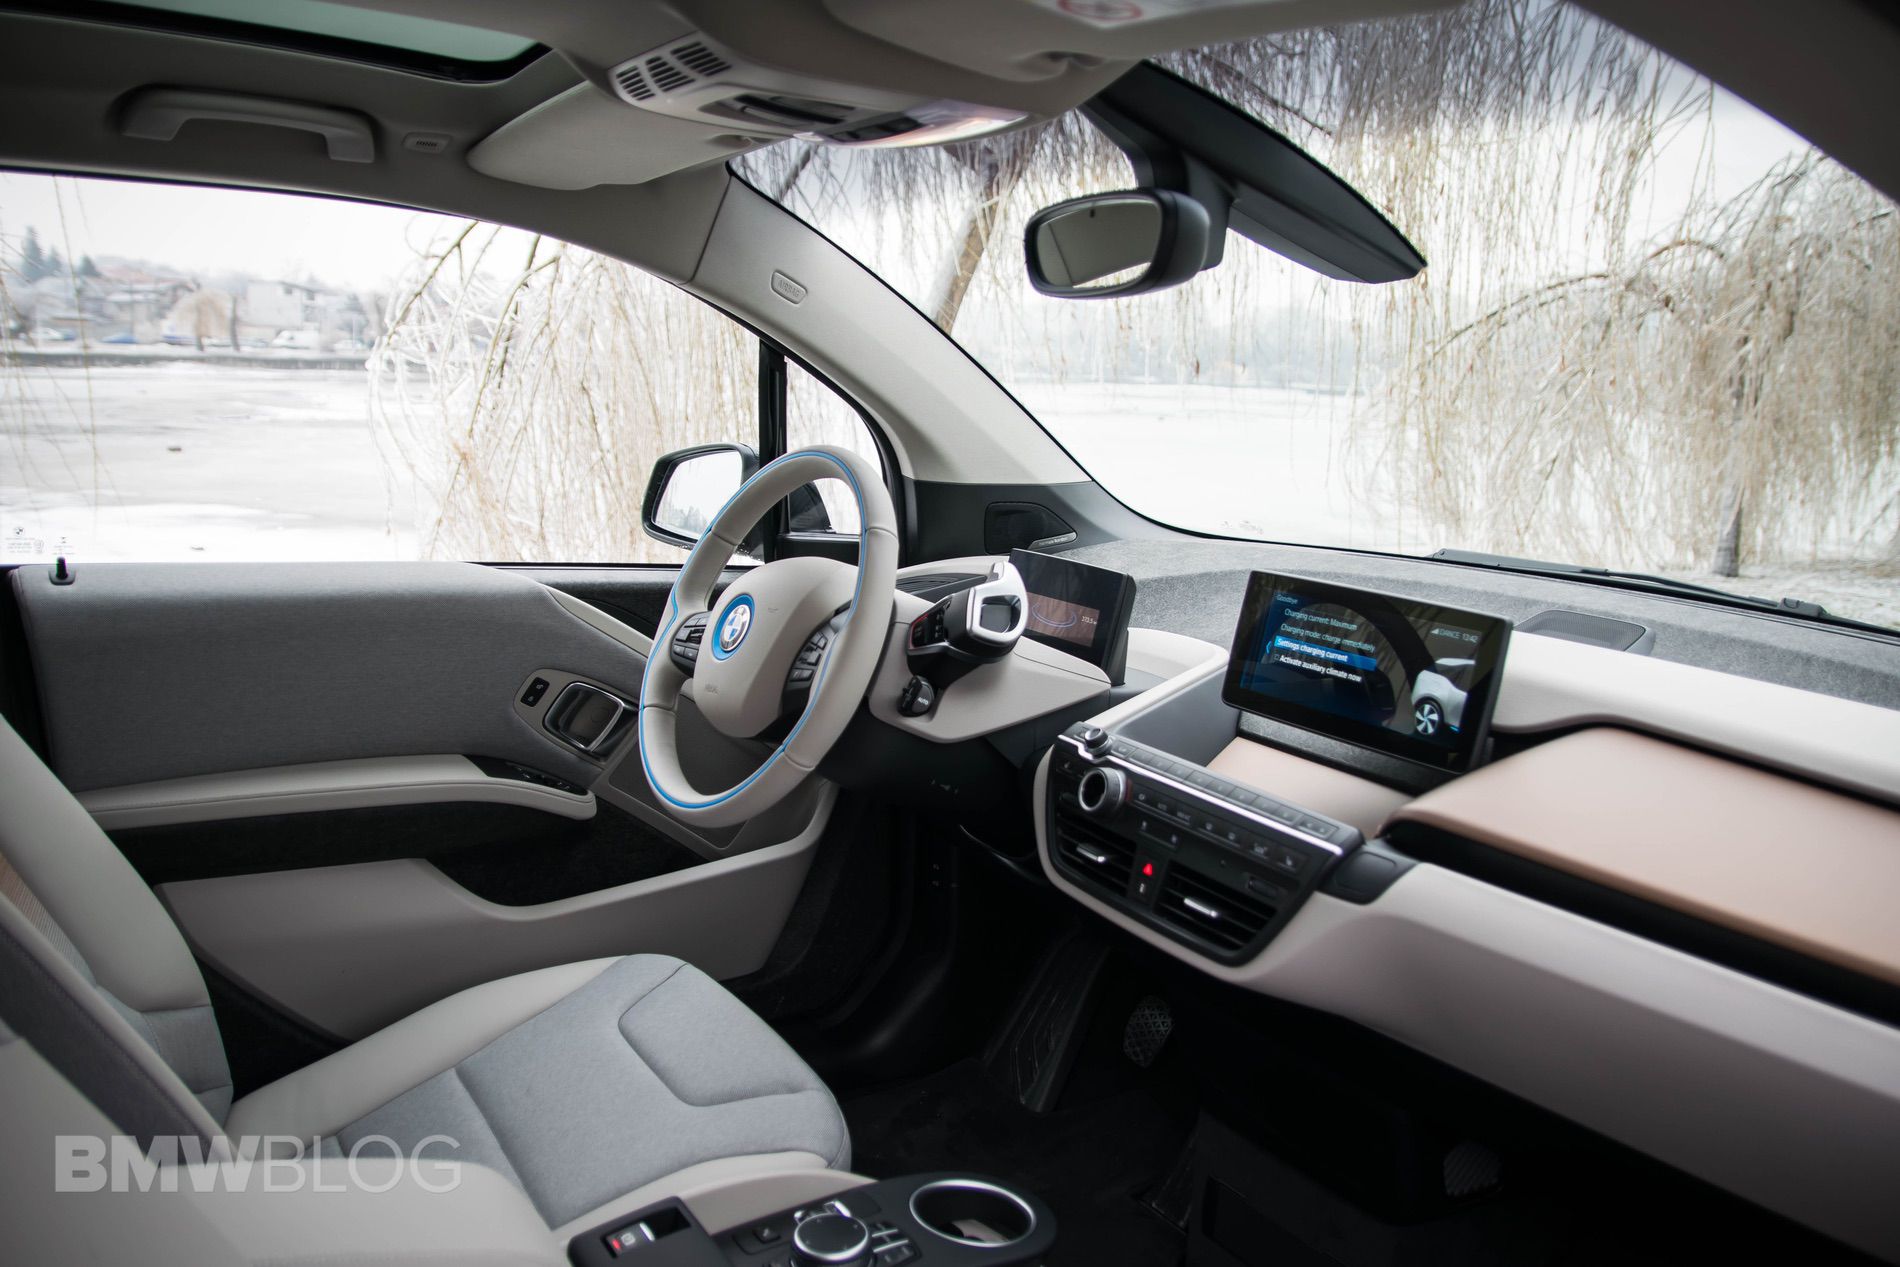 TEST DRIVE: 2019 BMW i3 120 Ah – "Getting There"